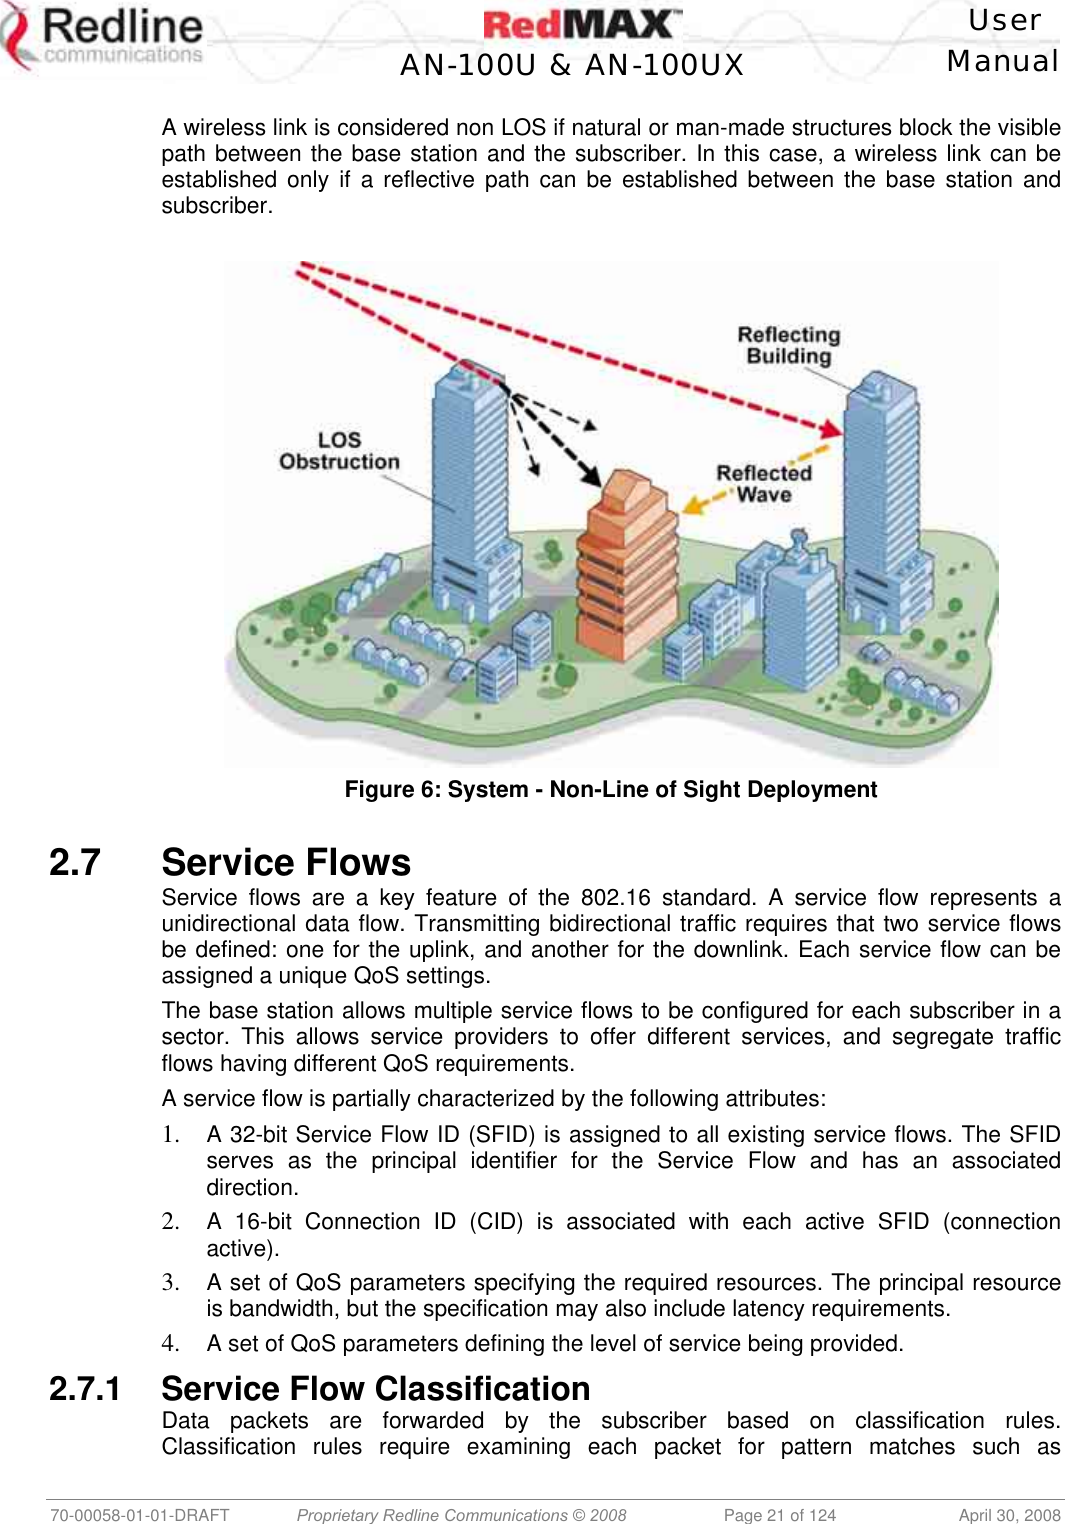    User  AN-100U &amp; AN-100UX Manual   70-00058-01-01-DRAFT  Proprietary Redline Communications © 2008   Page 21 of 124  April 30, 2008  A wireless link is considered non LOS if natural or man-made structures block the visible path between the base station and the subscriber. In this case, a wireless link can be established only if a reflective path can be established between the base station and subscriber.   Figure 6: System - Non-Line of Sight Deployment   2.7 Service Flows Service flows are a key feature of the 802.16 standard. A service flow represents a unidirectional data flow. Transmitting bidirectional traffic requires that two service flows be defined: one for the uplink, and another for the downlink. Each service flow can be assigned a unique QoS settings. The base station allows multiple service flows to be configured for each subscriber in a sector. This allows service providers to offer different services, and segregate traffic flows having different QoS requirements. A service flow is partially characterized by the following attributes: 1.  A 32-bit Service Flow ID (SFID) is assigned to all existing service flows. The SFID serves as the principal identifier for the Service Flow and has an associated direction. 2.  A 16-bit Connection ID (CID) is associated with each active SFID (connection active). 3.  A set of QoS parameters specifying the required resources. The principal resource is bandwidth, but the specification may also include latency requirements. 4.  A set of QoS parameters defining the level of service being provided. 2.7.1 Service Flow Classification Data packets are forwarded by the subscriber based on classification rules. Classification rules require examining each packet for pattern matches such as 